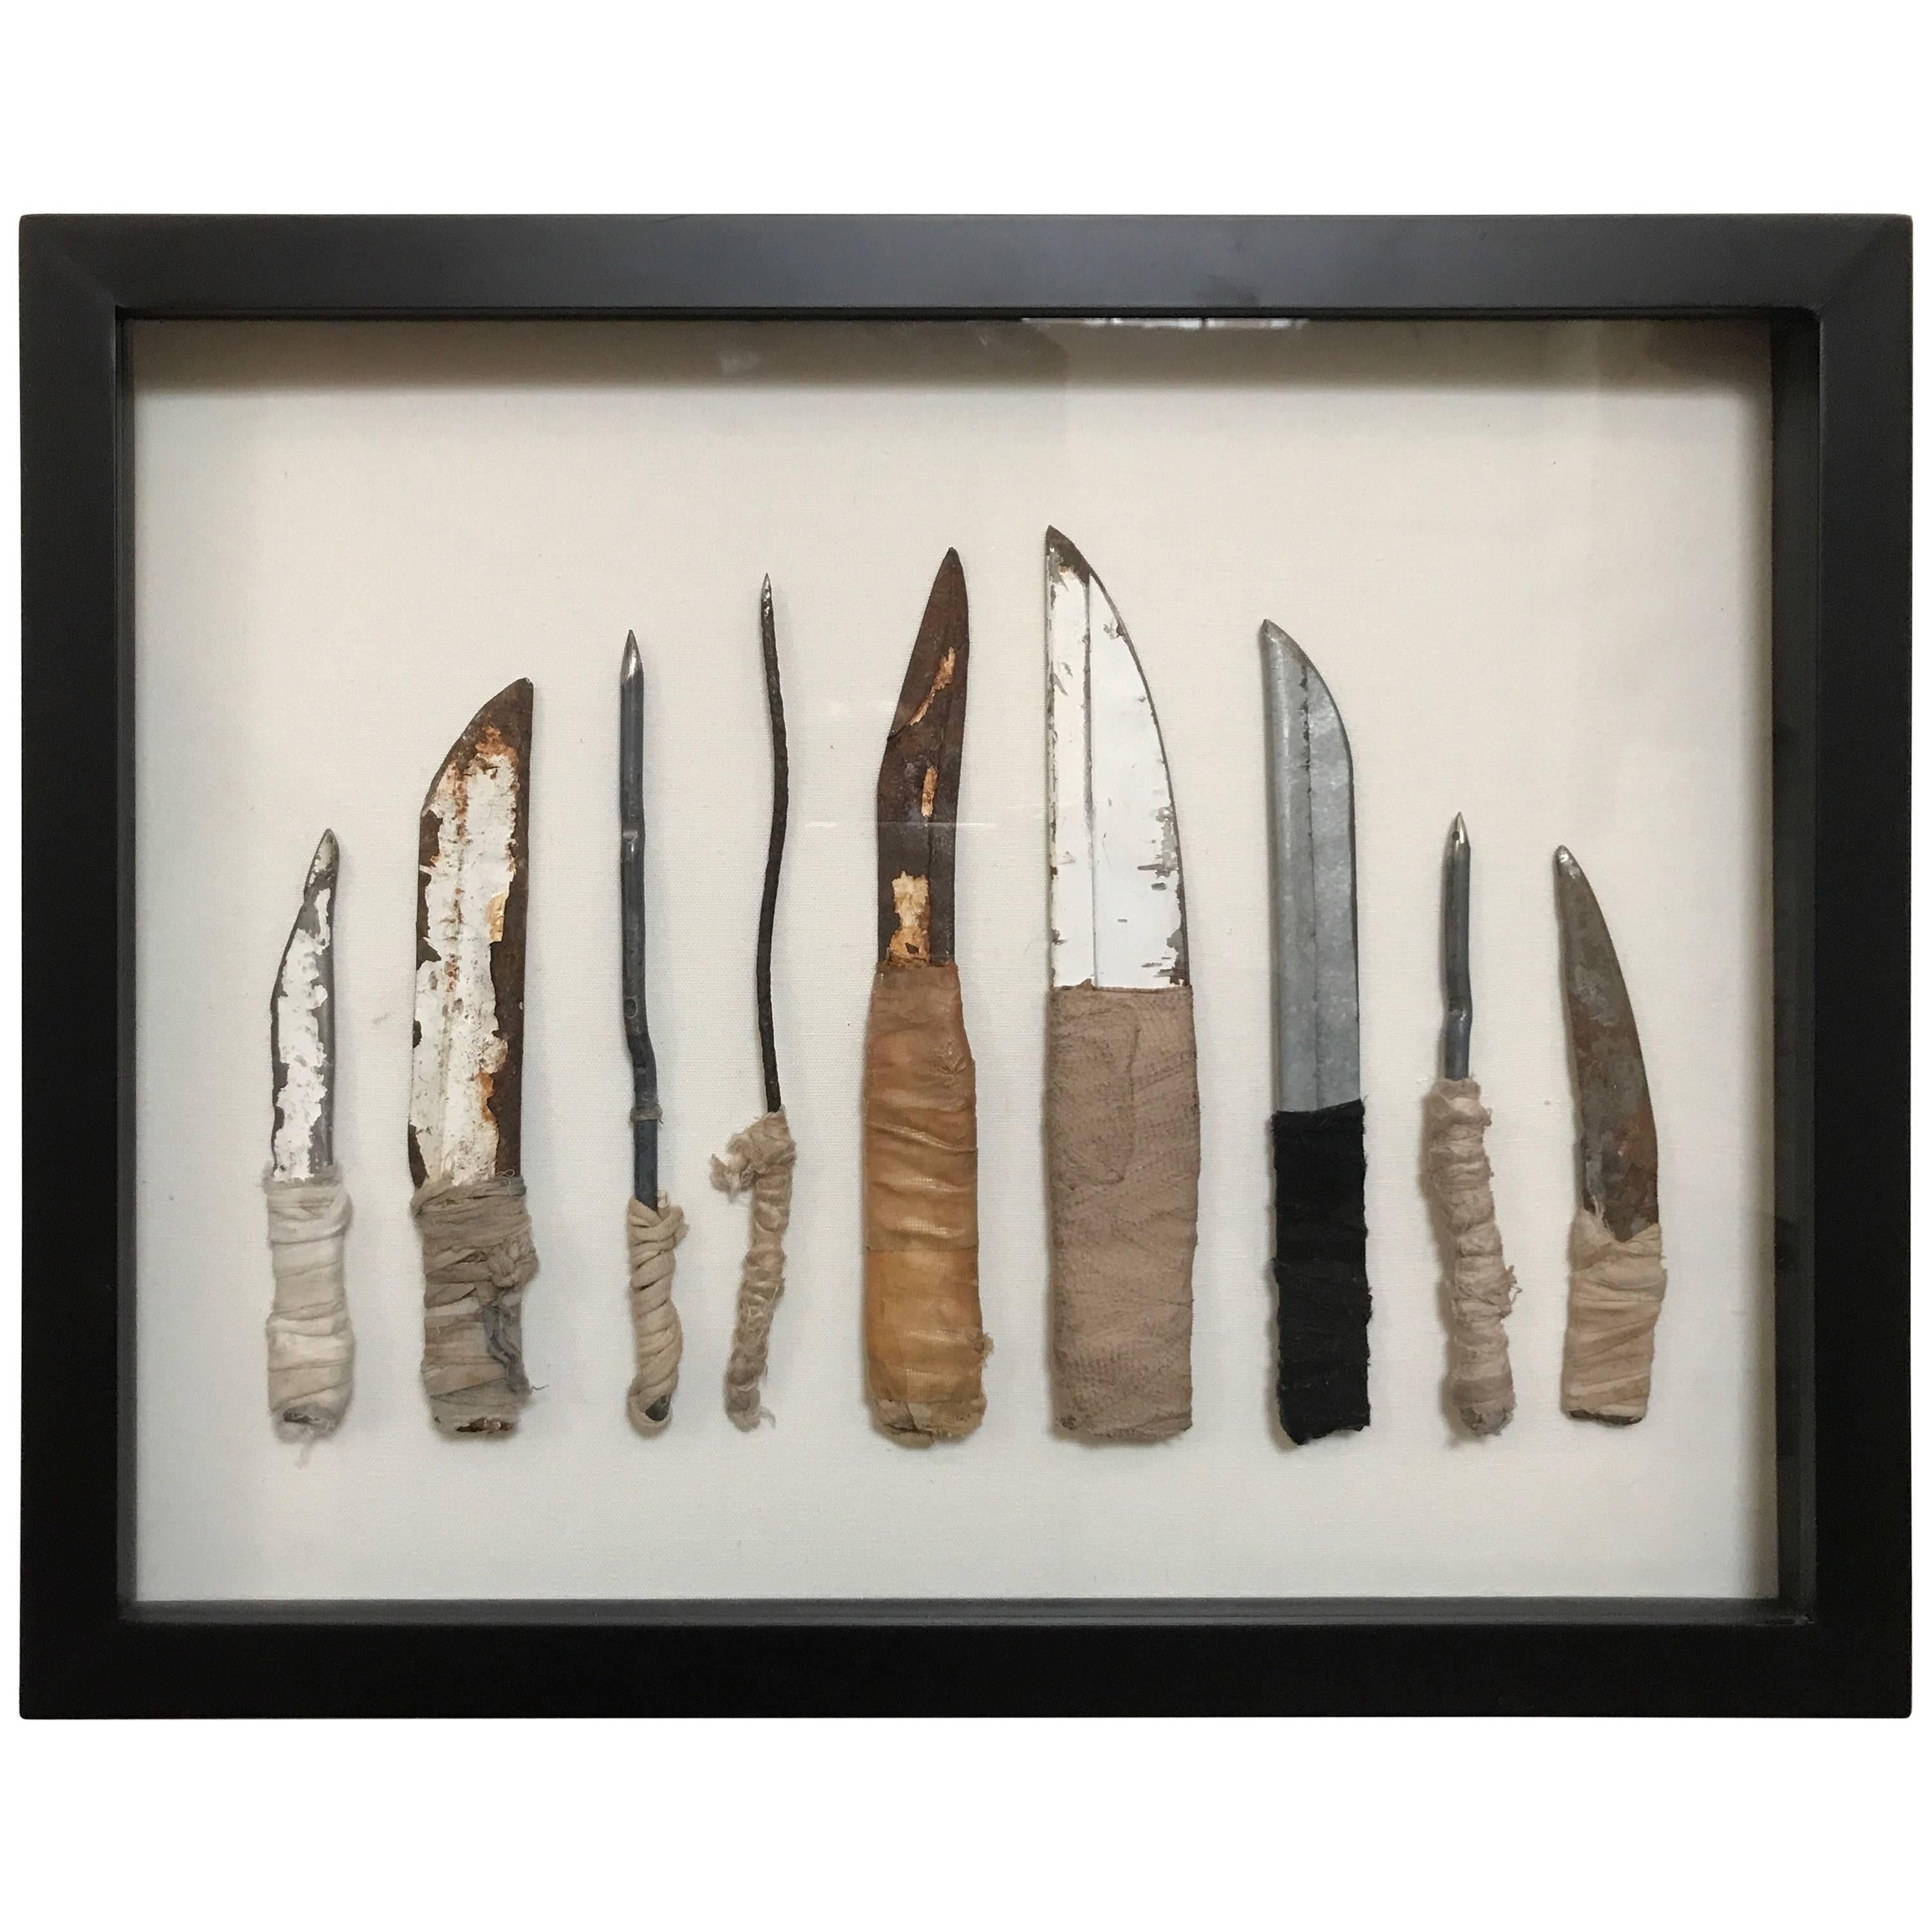 Collection of Late 19th-Early 20th Century Framed Prison Shivs